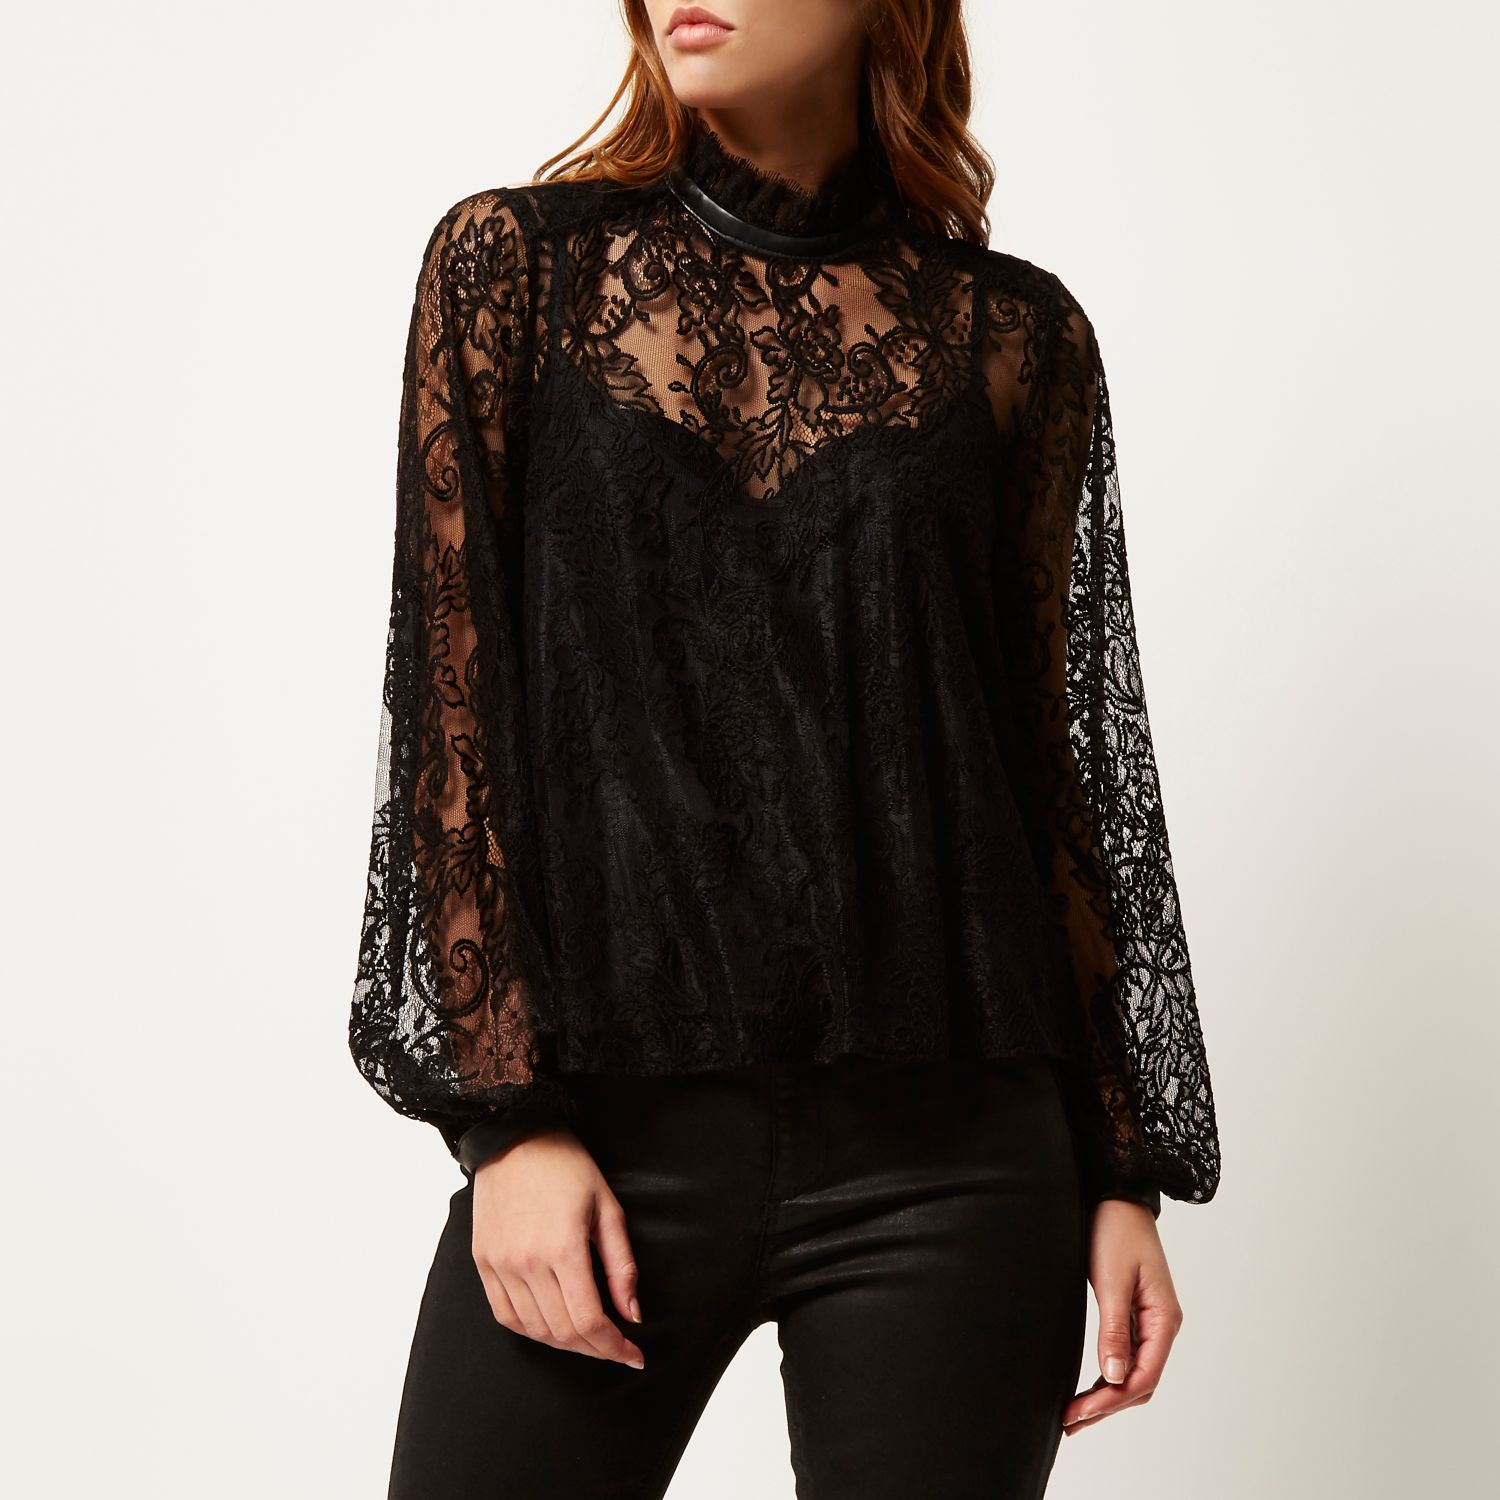 River island Black Lace High Neck Blouse in Black | Lyst